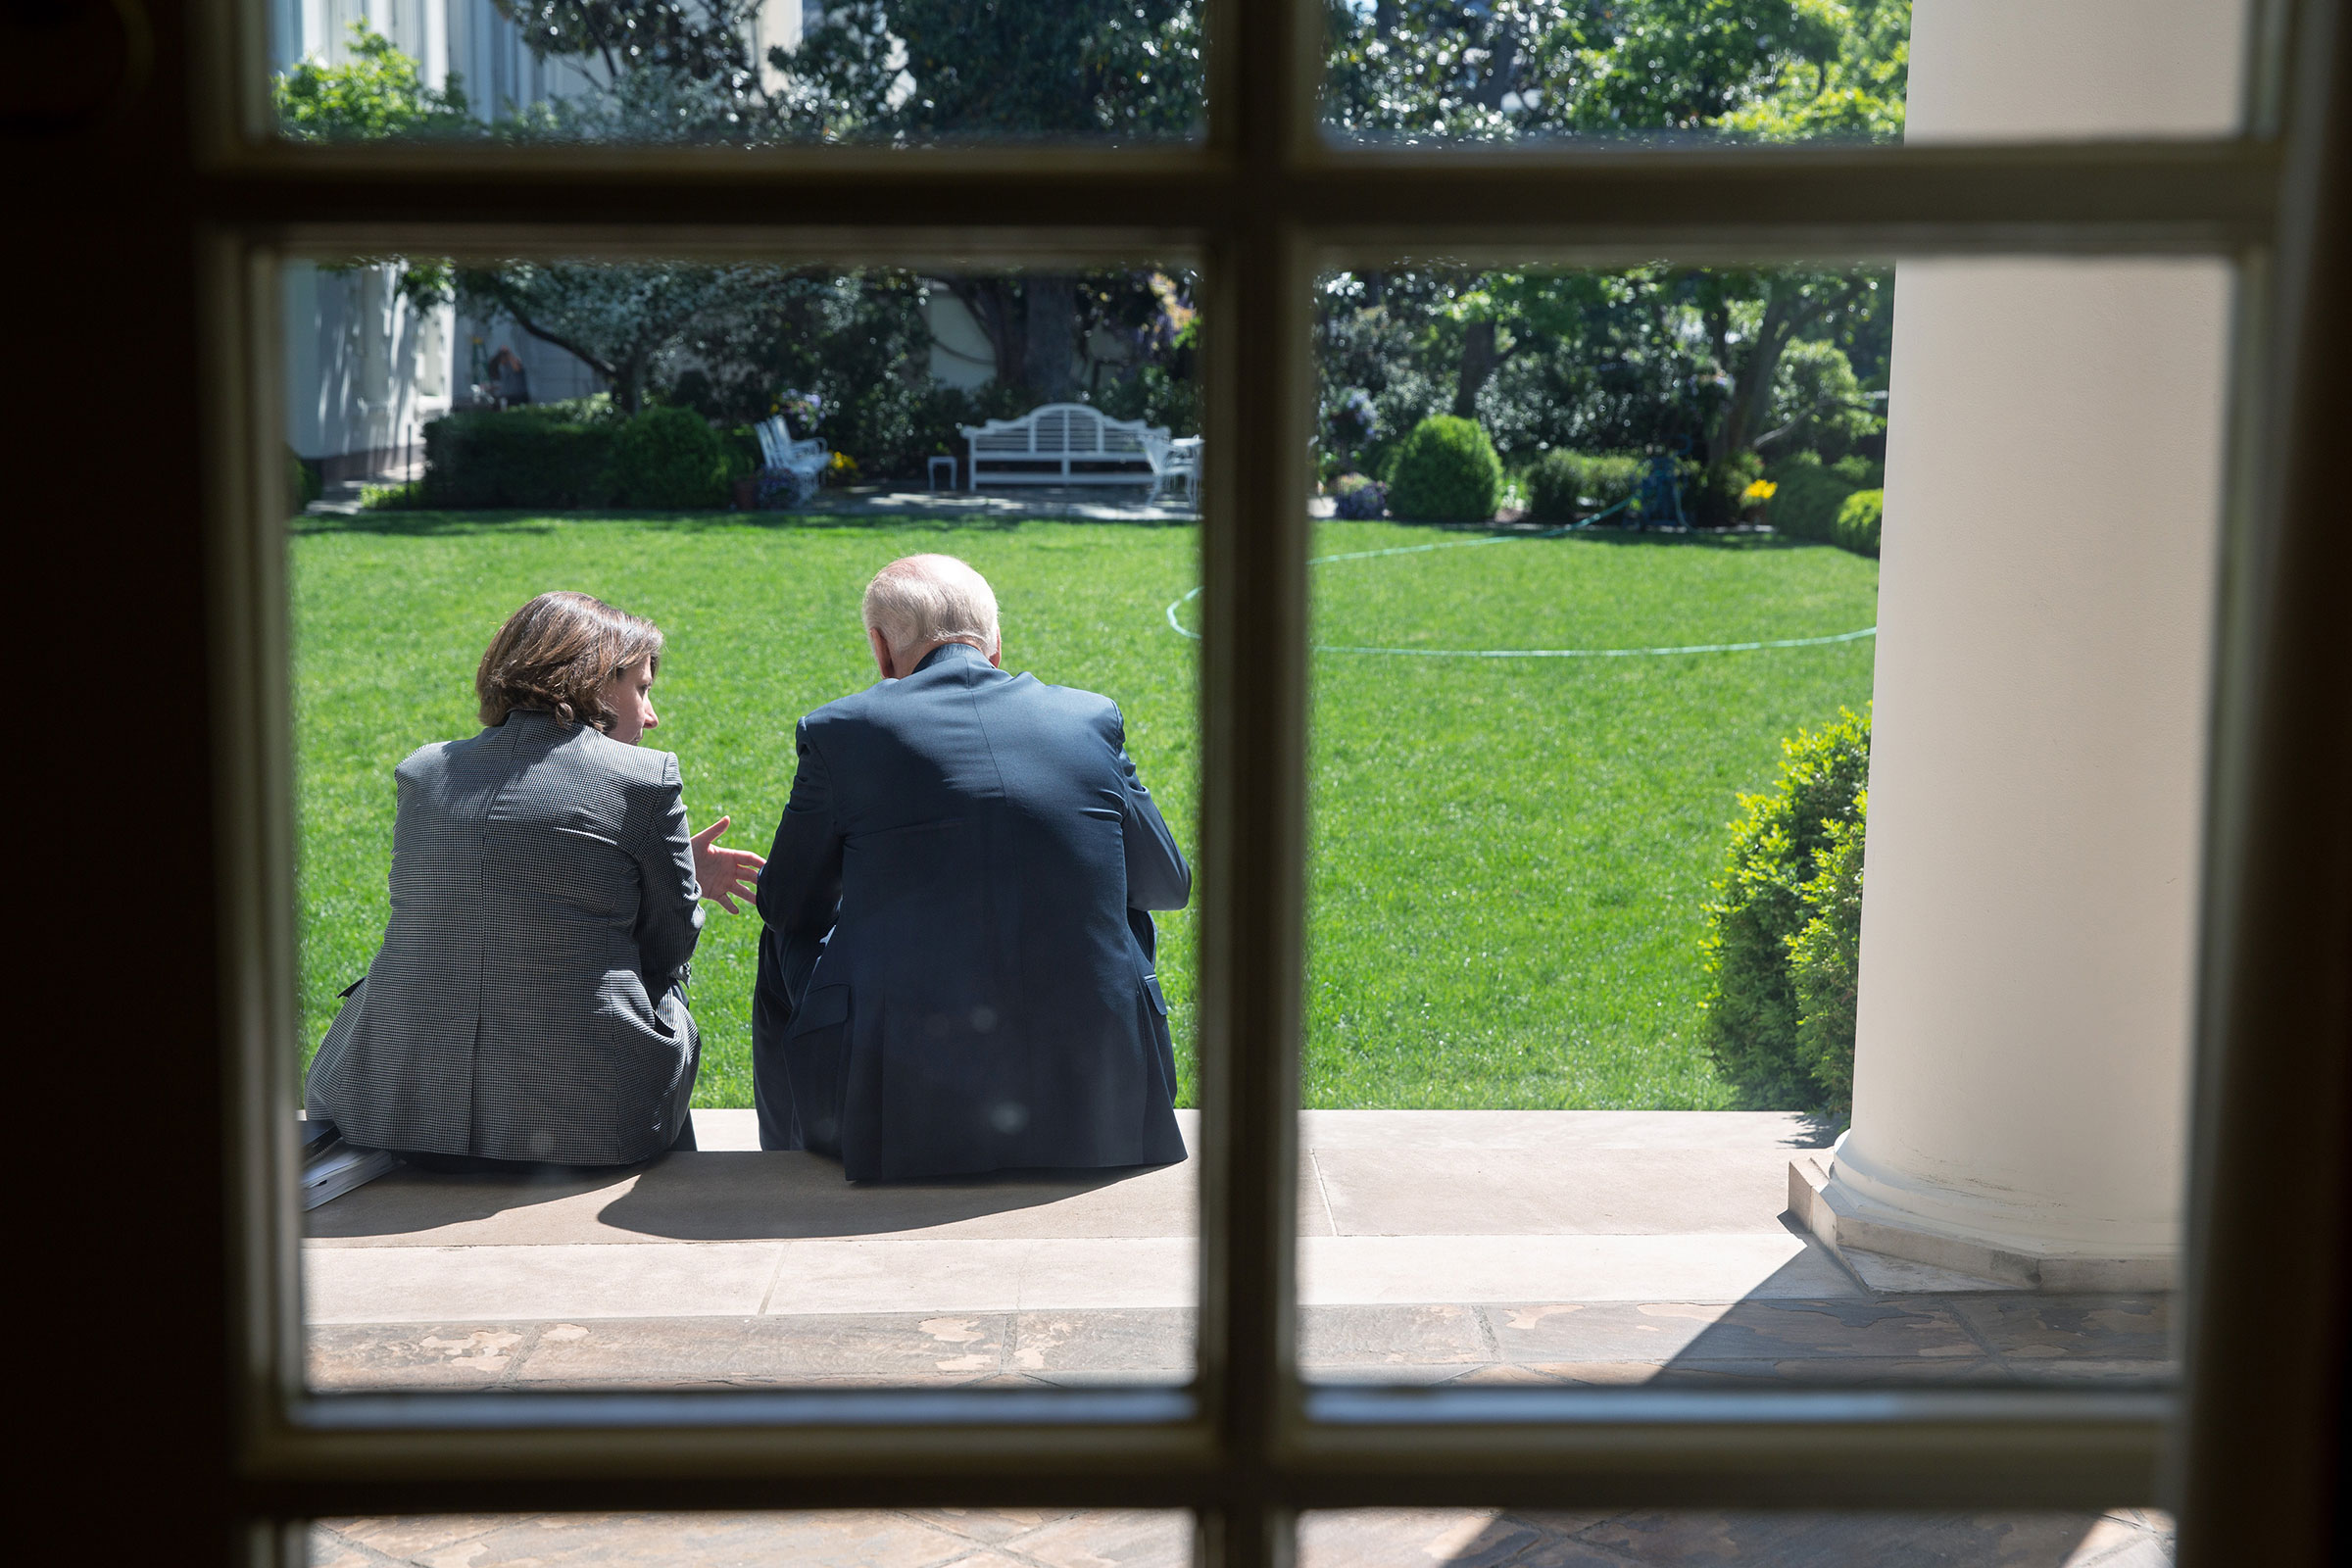 Vice President Joe Biden and Lisa Monaco, Assistant to the President for Homeland Security and Counterterrorism, talk on the steps from the Colonnade to the Rose Garden at the White House following the Presidential Daily Briefing, on May 1, 2013. (Official White House Photo by Pete Souza)